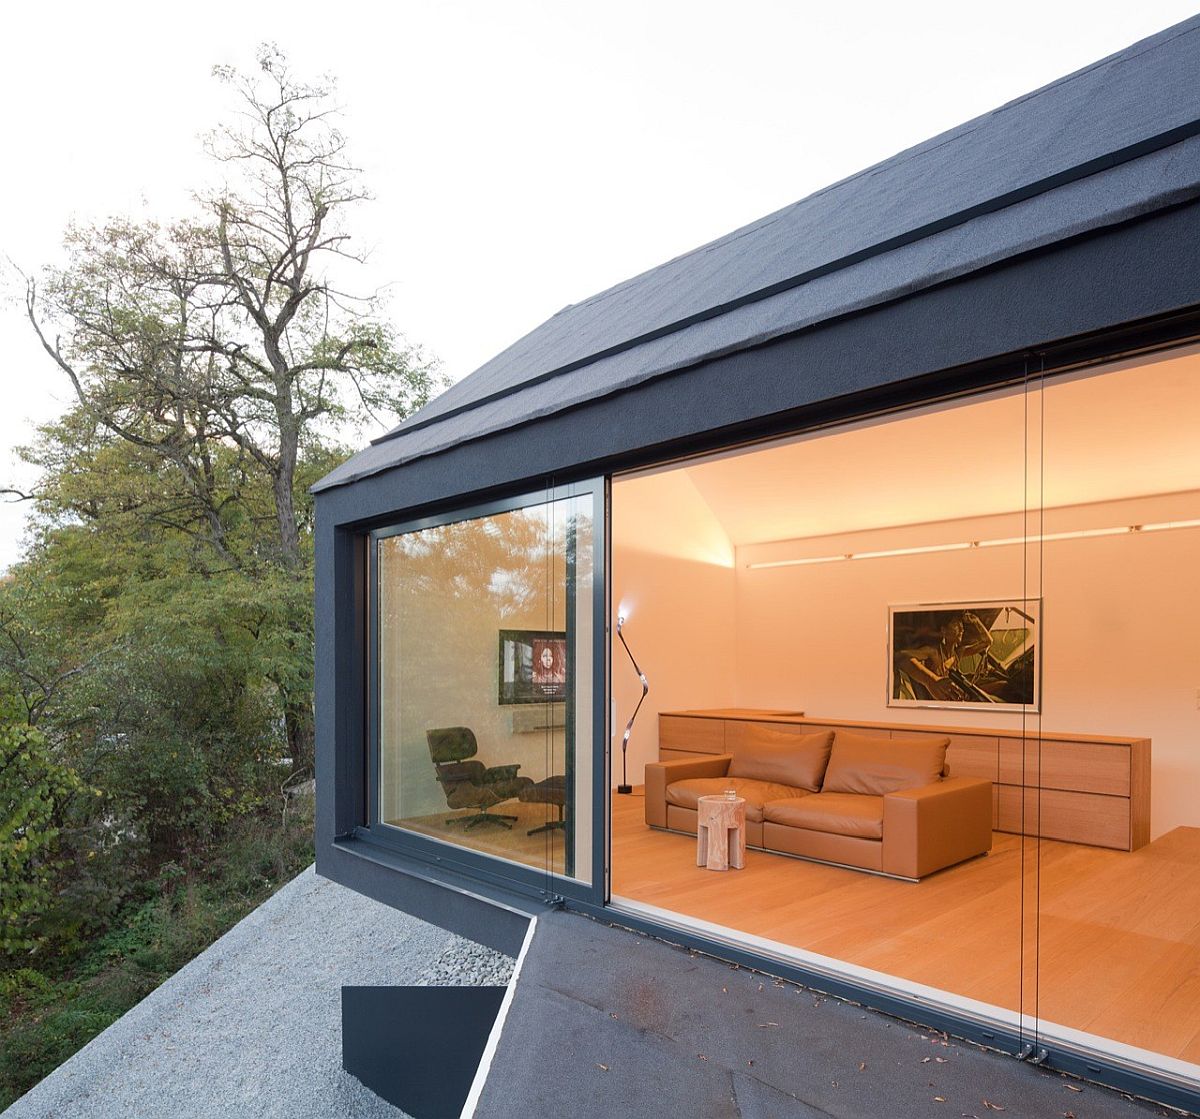 Floor-to-cACeiling sliding glass doors of the Studio House